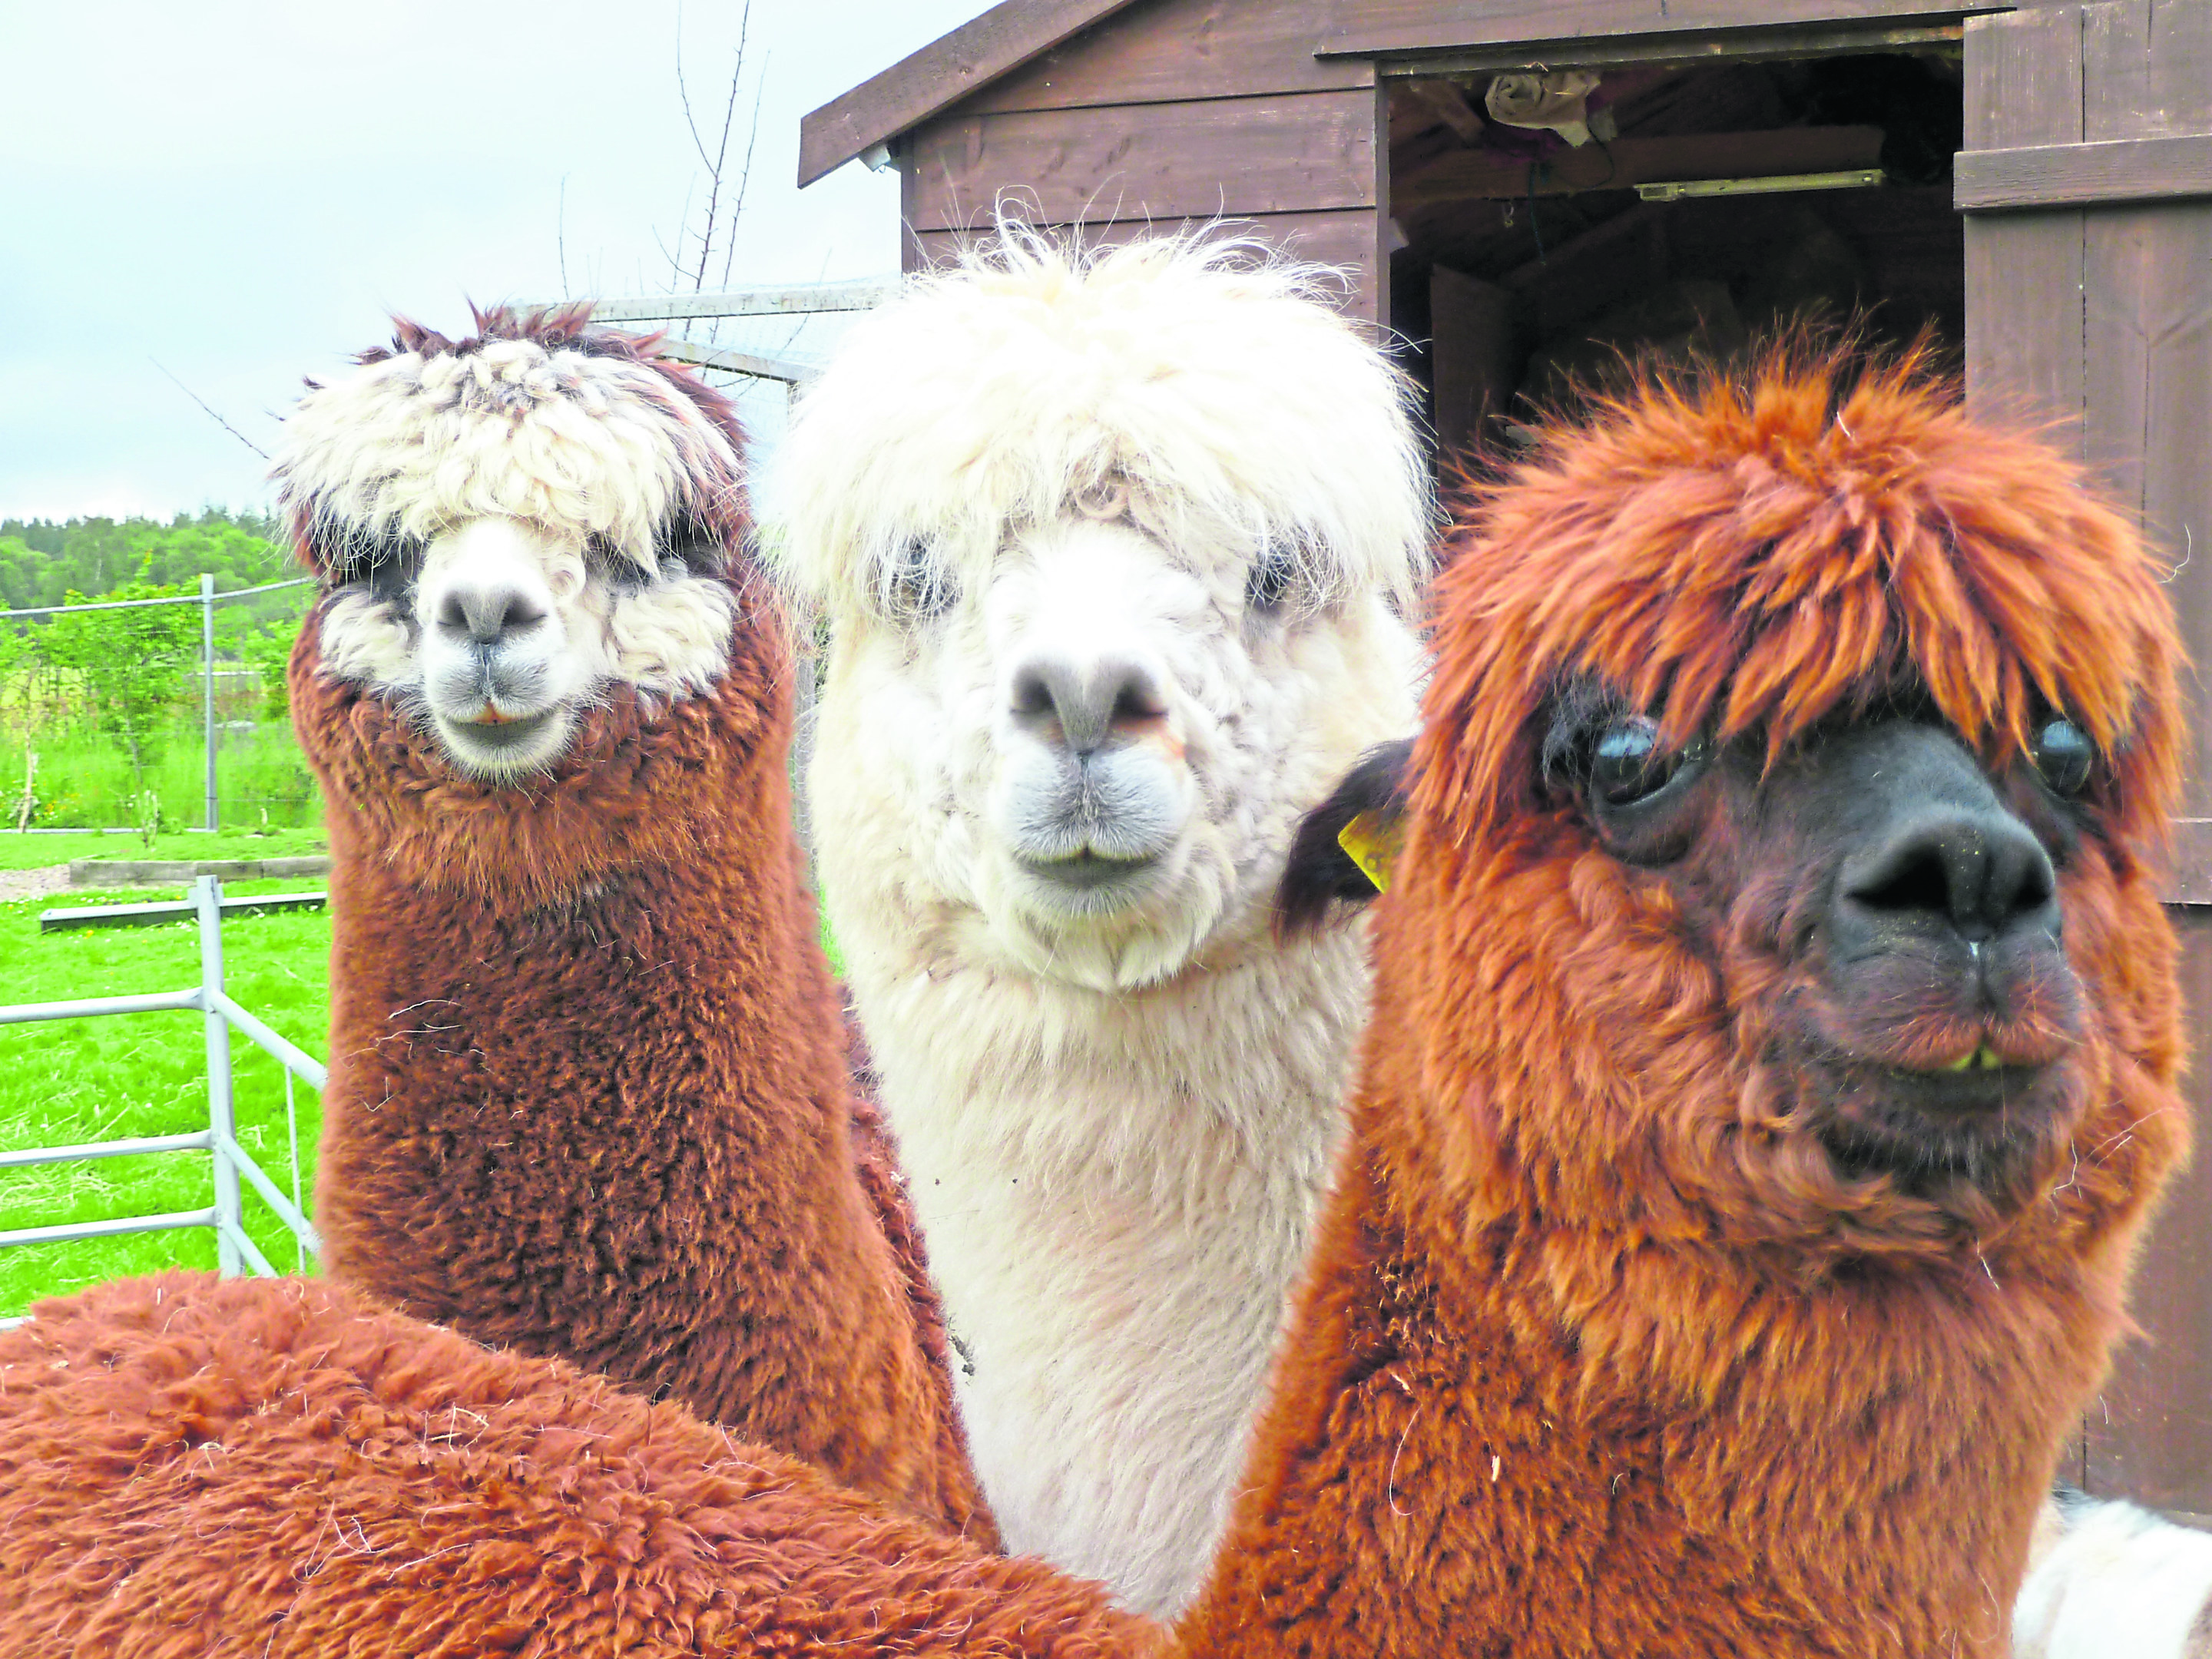 The friendly herd of alpacas will be back for this year’s event.